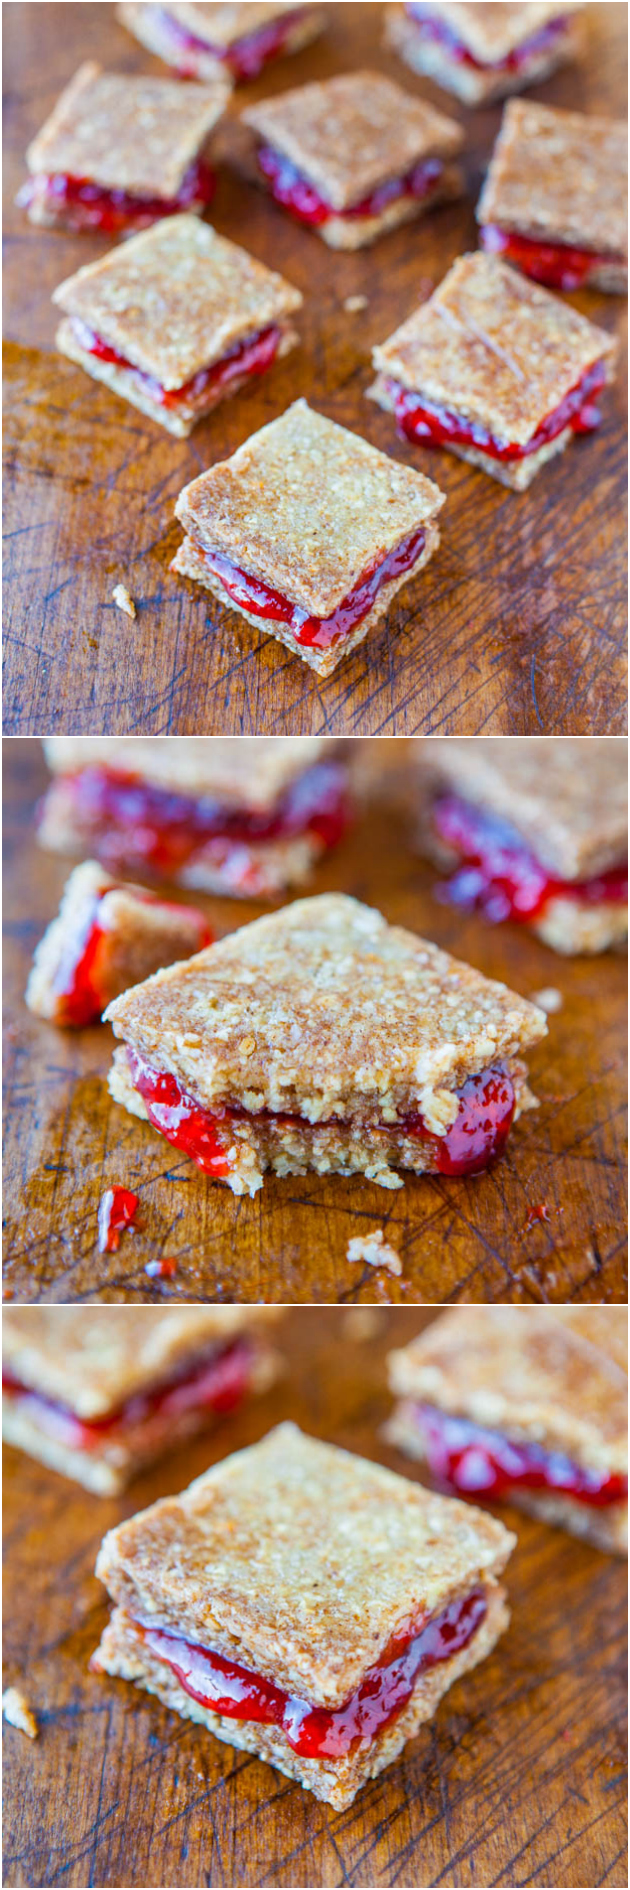 Peanut Butter and Jelly Coconut Cashew Sandwich Cookies (no-bake, vegan, gluten-free) - Healthier peanut butter cookies that are so easy to make! Great on their own but even better as sandwich cookies! 